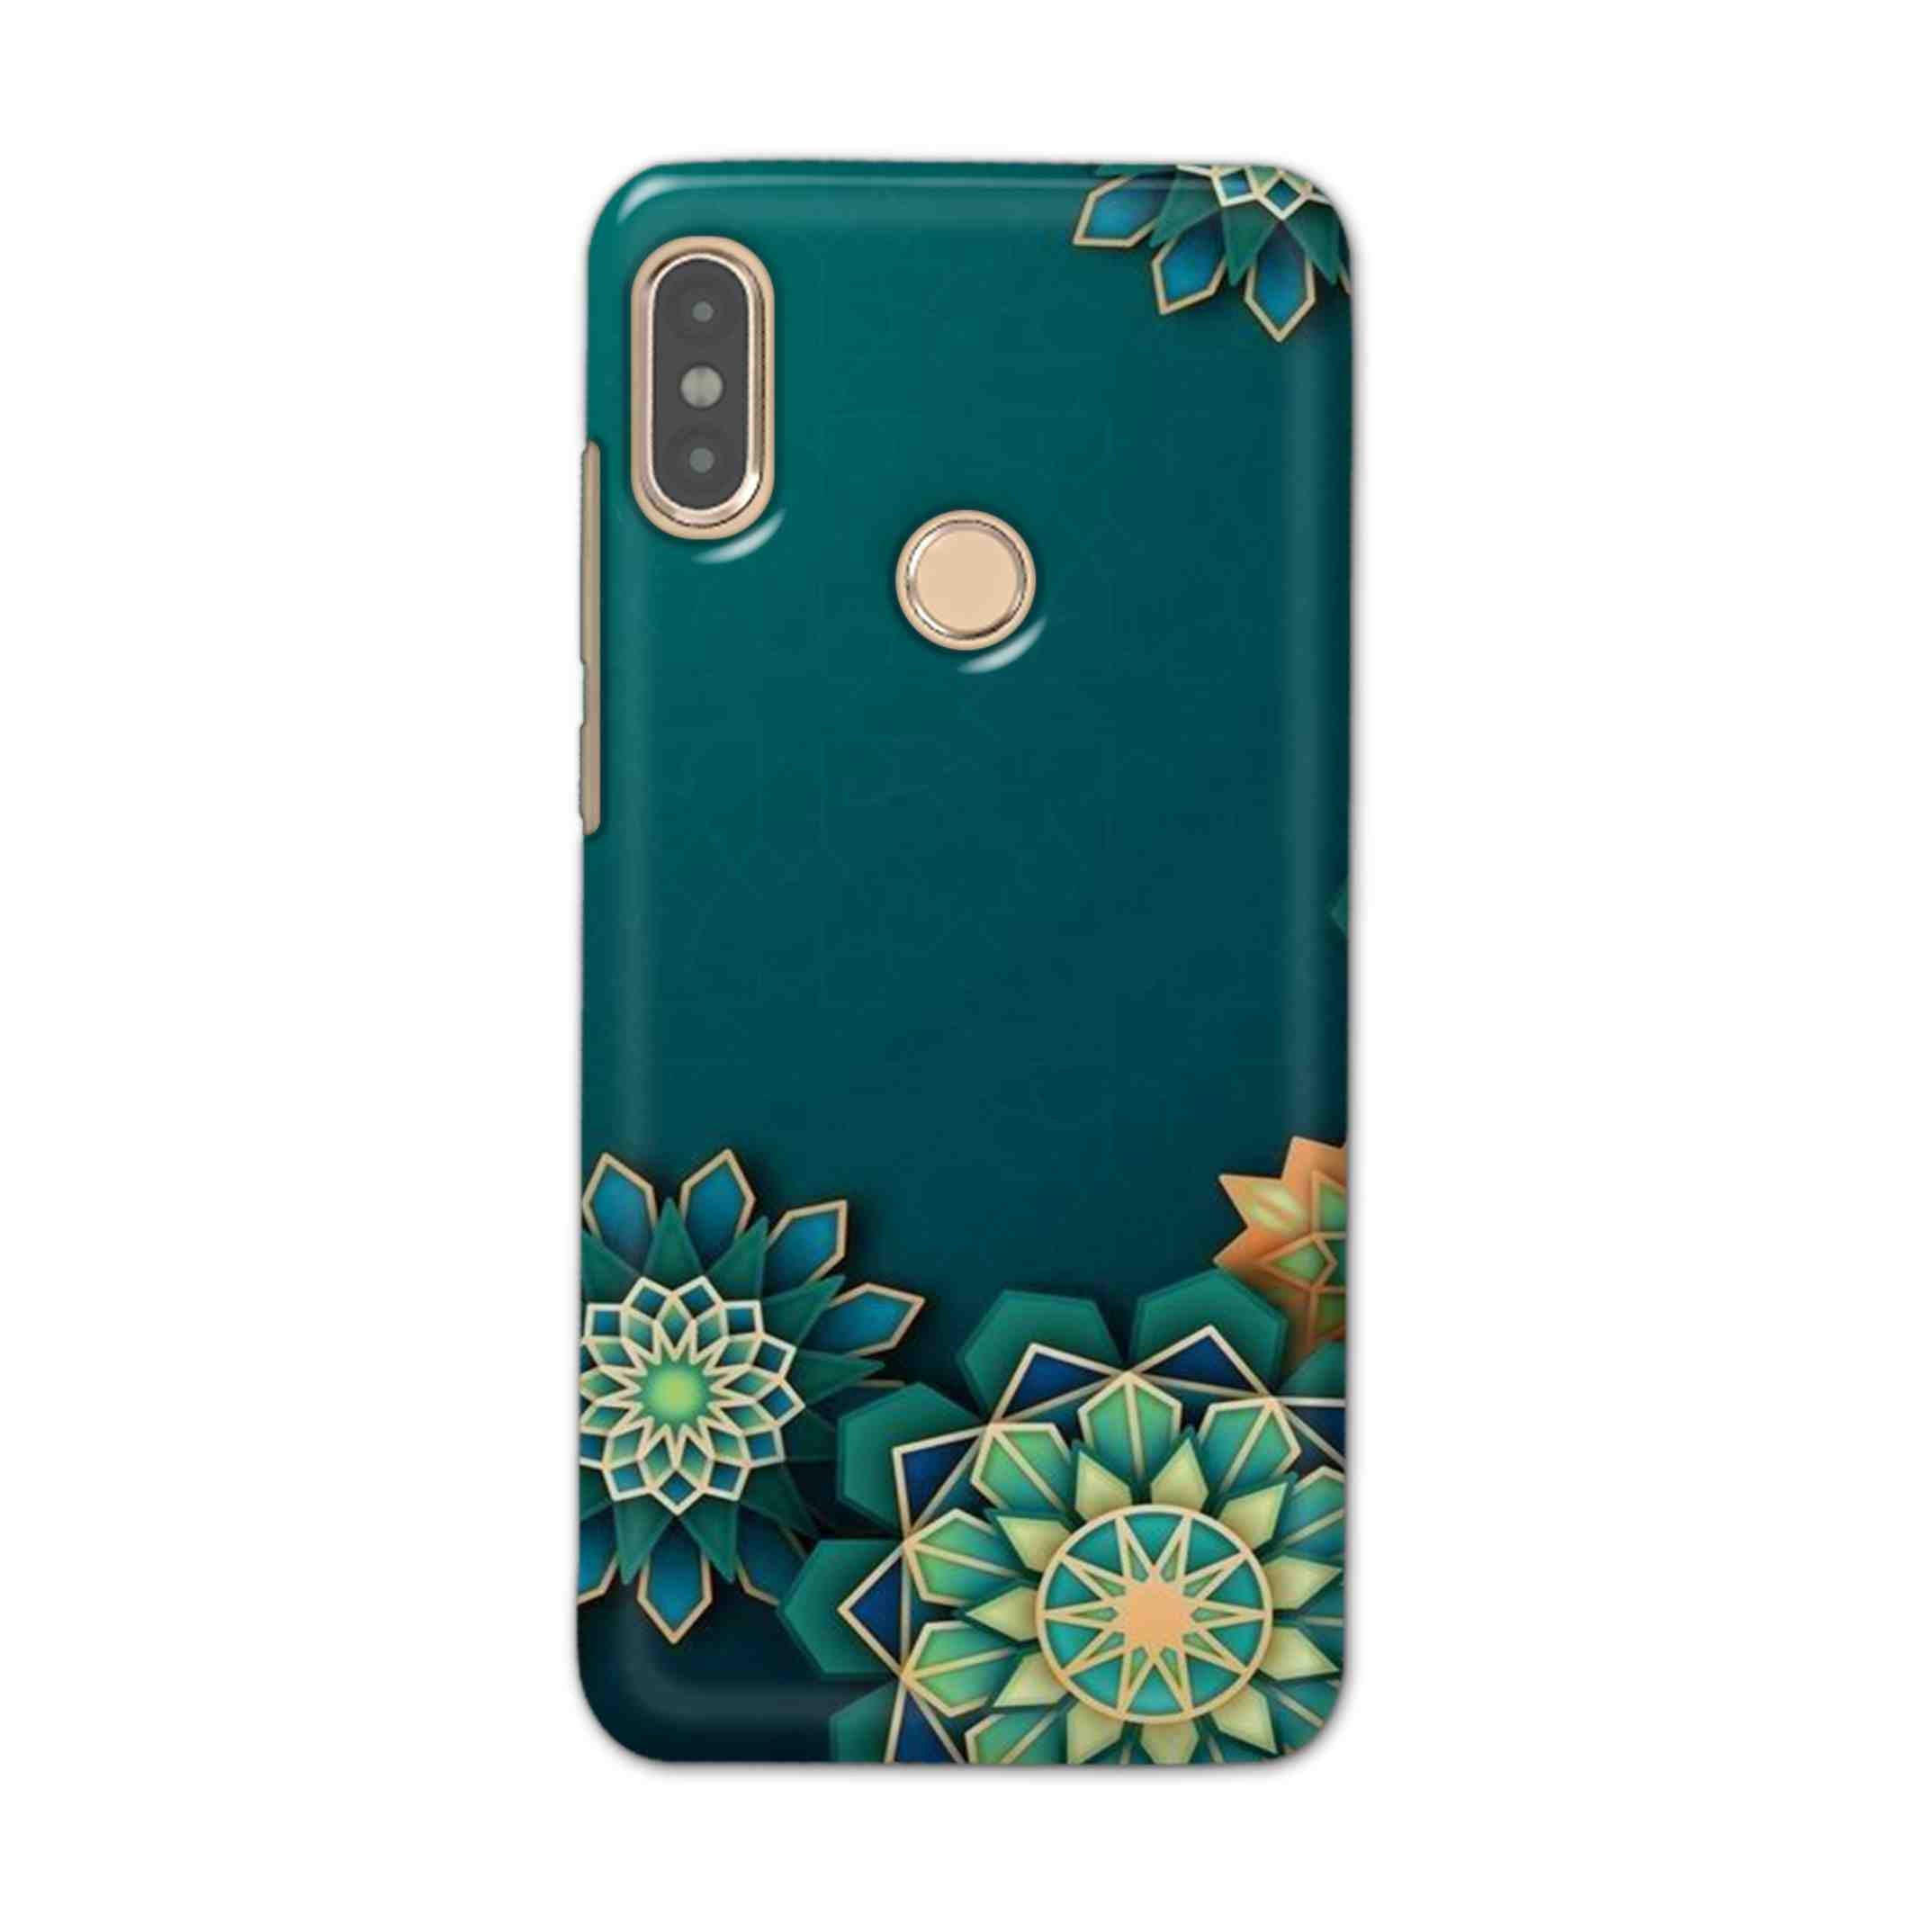 Buy Green Flower Hard Back Mobile Phone Case Cover For Xiaomi Redmi Note 5 Pro Online